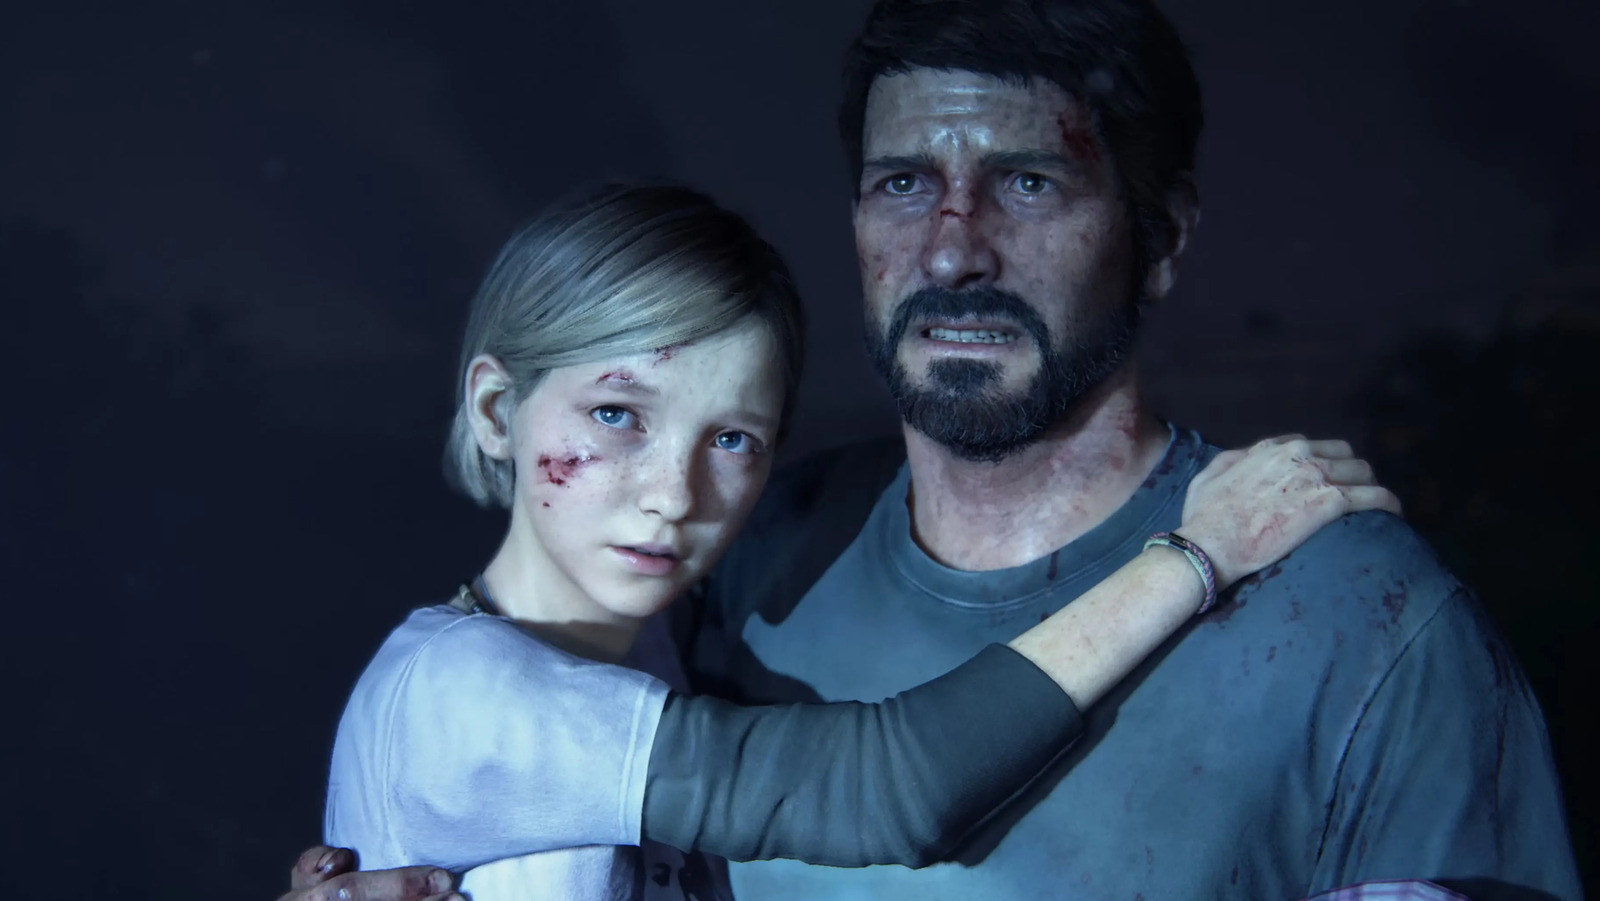 Original Joel Actor From 'The Last Of Us' Video Game Stars In The